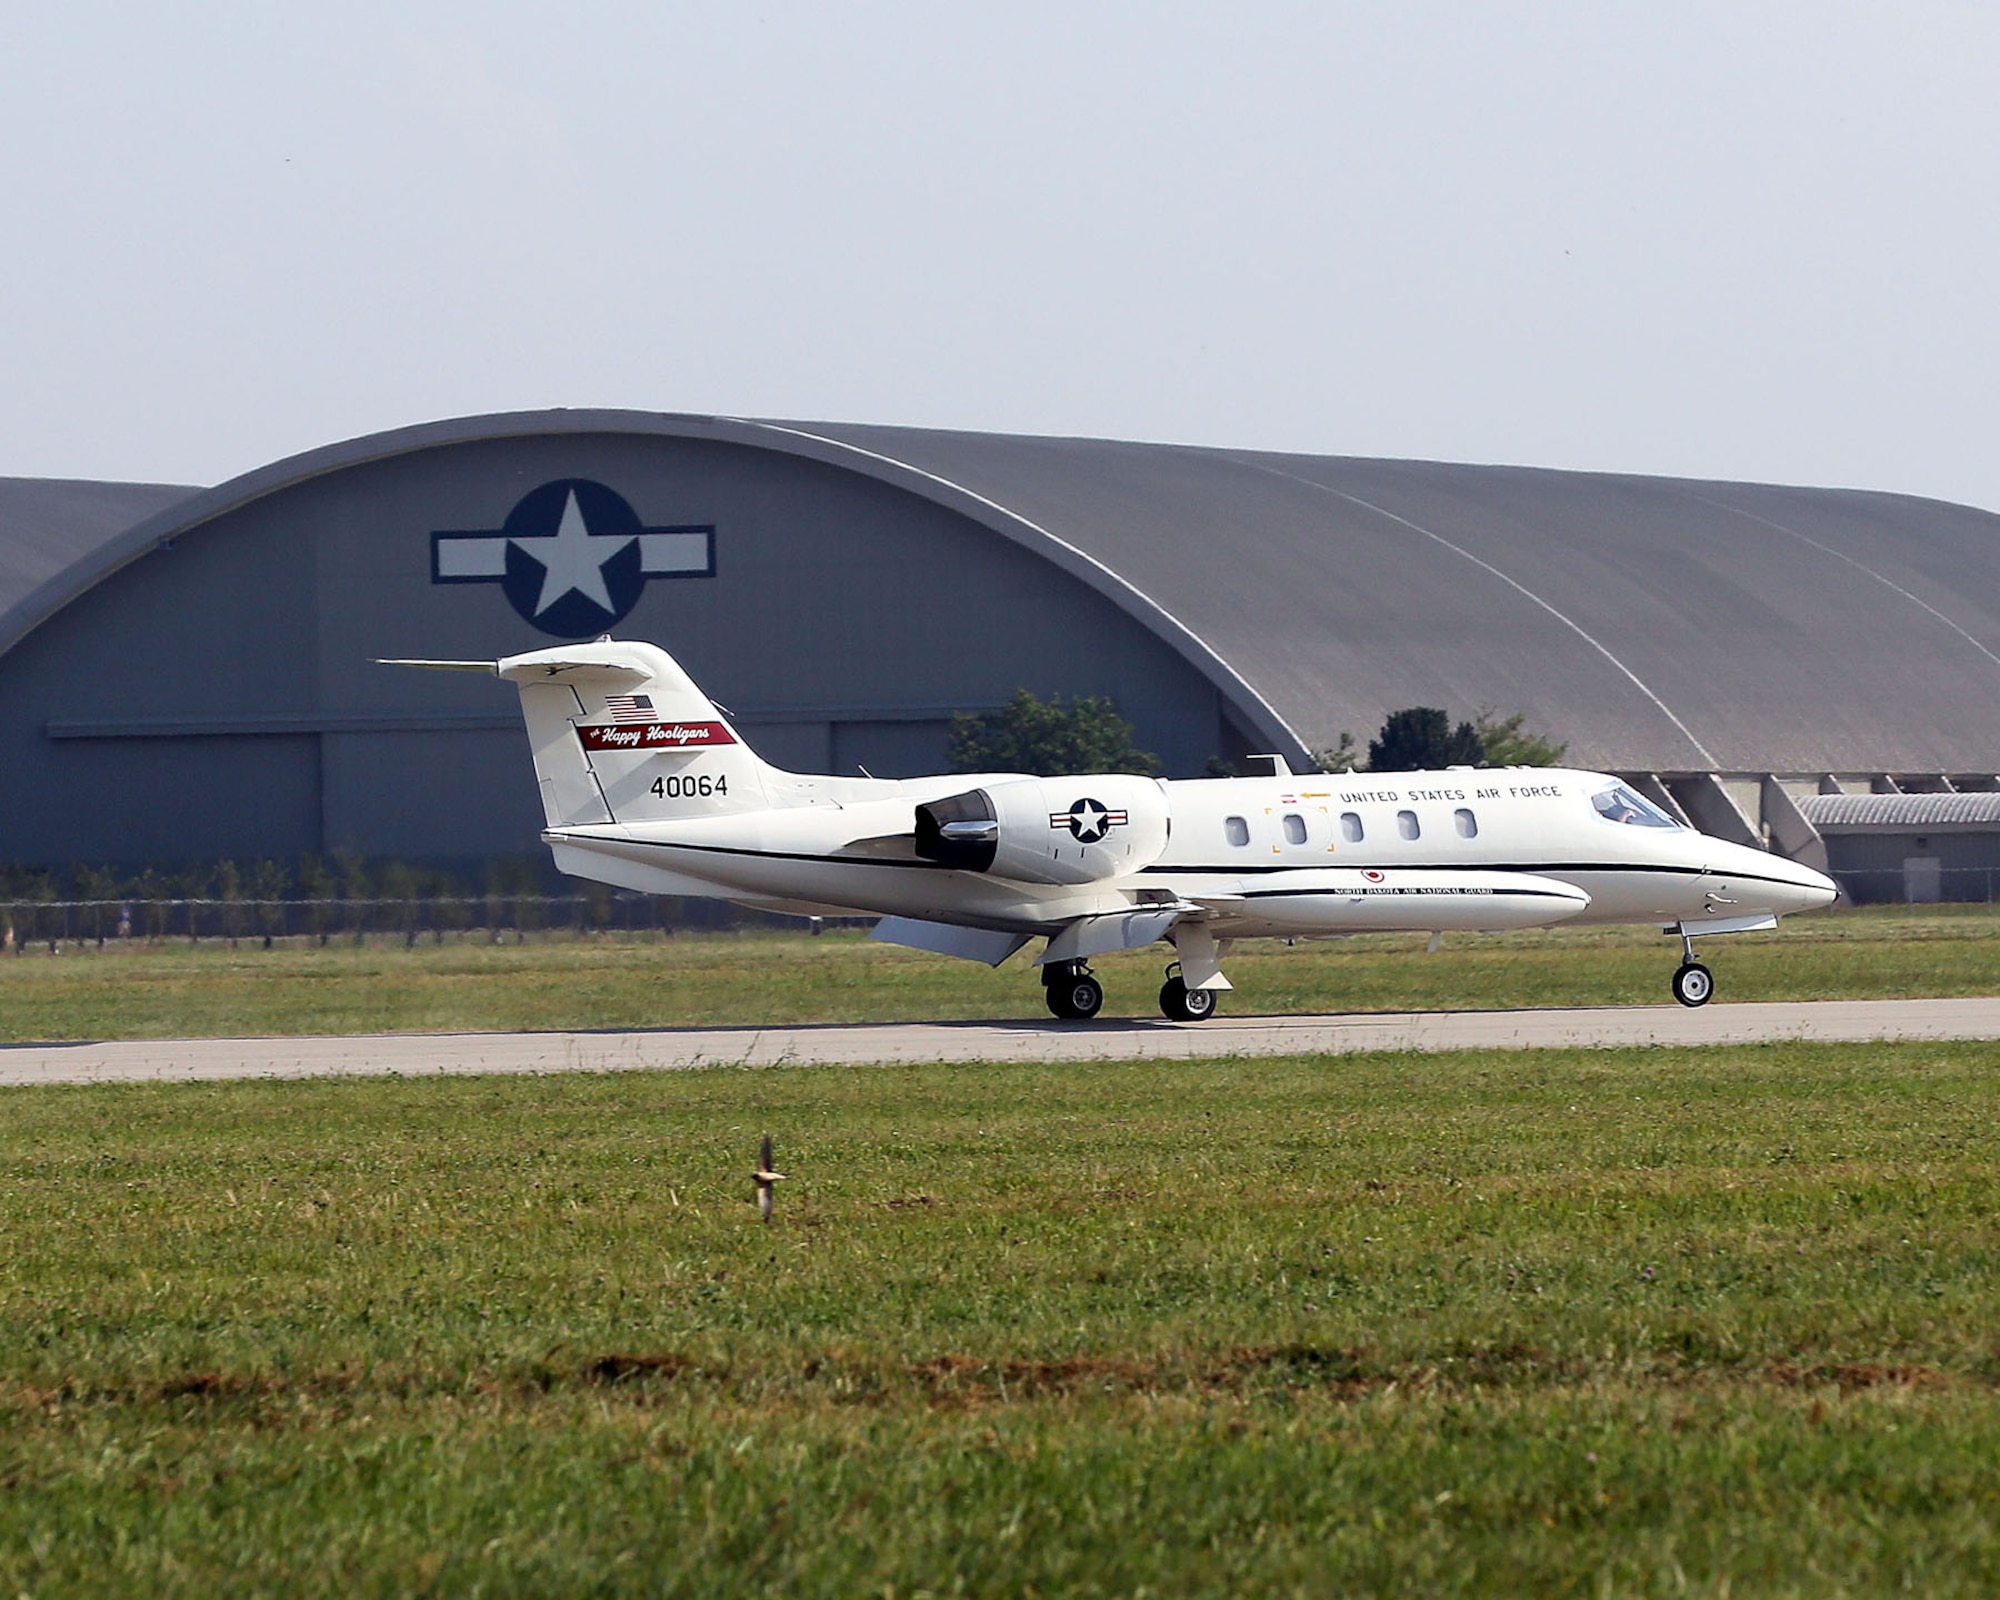 DAYTON, Ohio -- One of the U.S. Air Force’s first Learjet C-21A aircraft landed at the National Museum of the U.S. Air Force on Aug. 28, 2013. (U.S. Air Force photo by Don Popp)